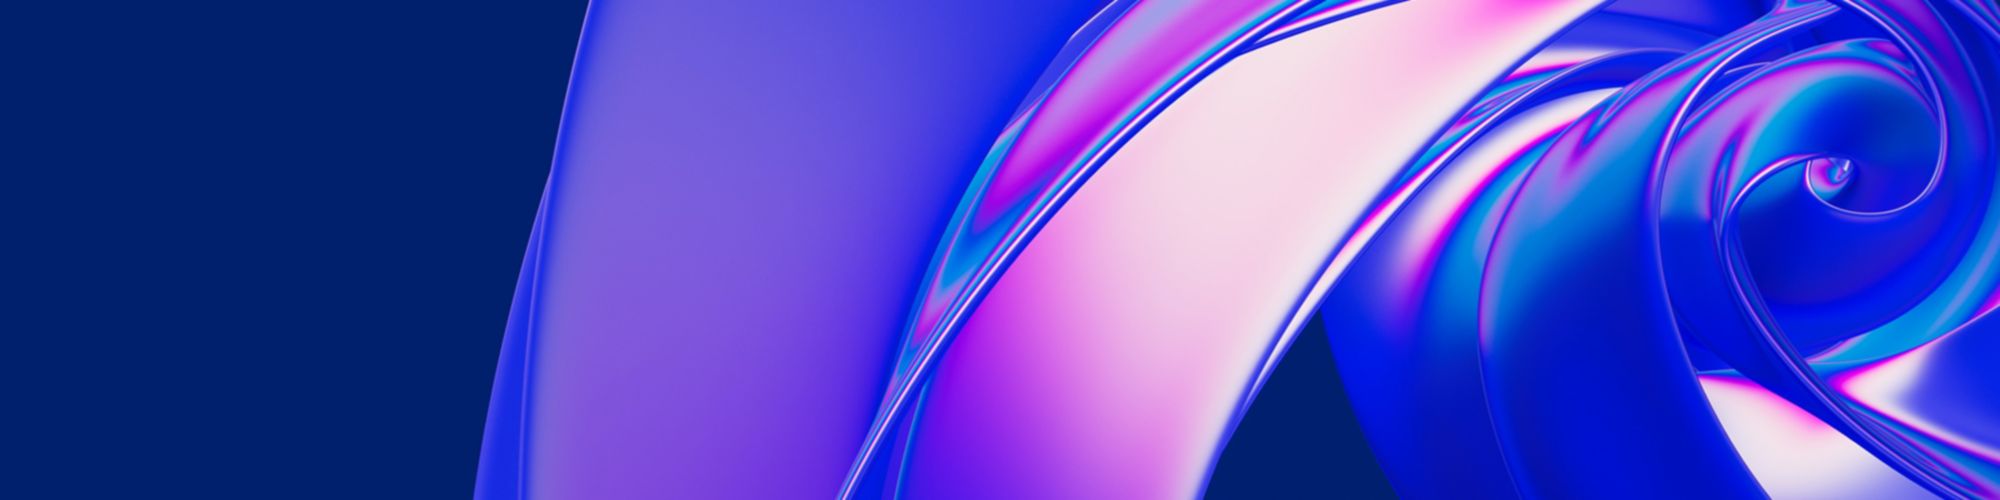 Blue purple abstract